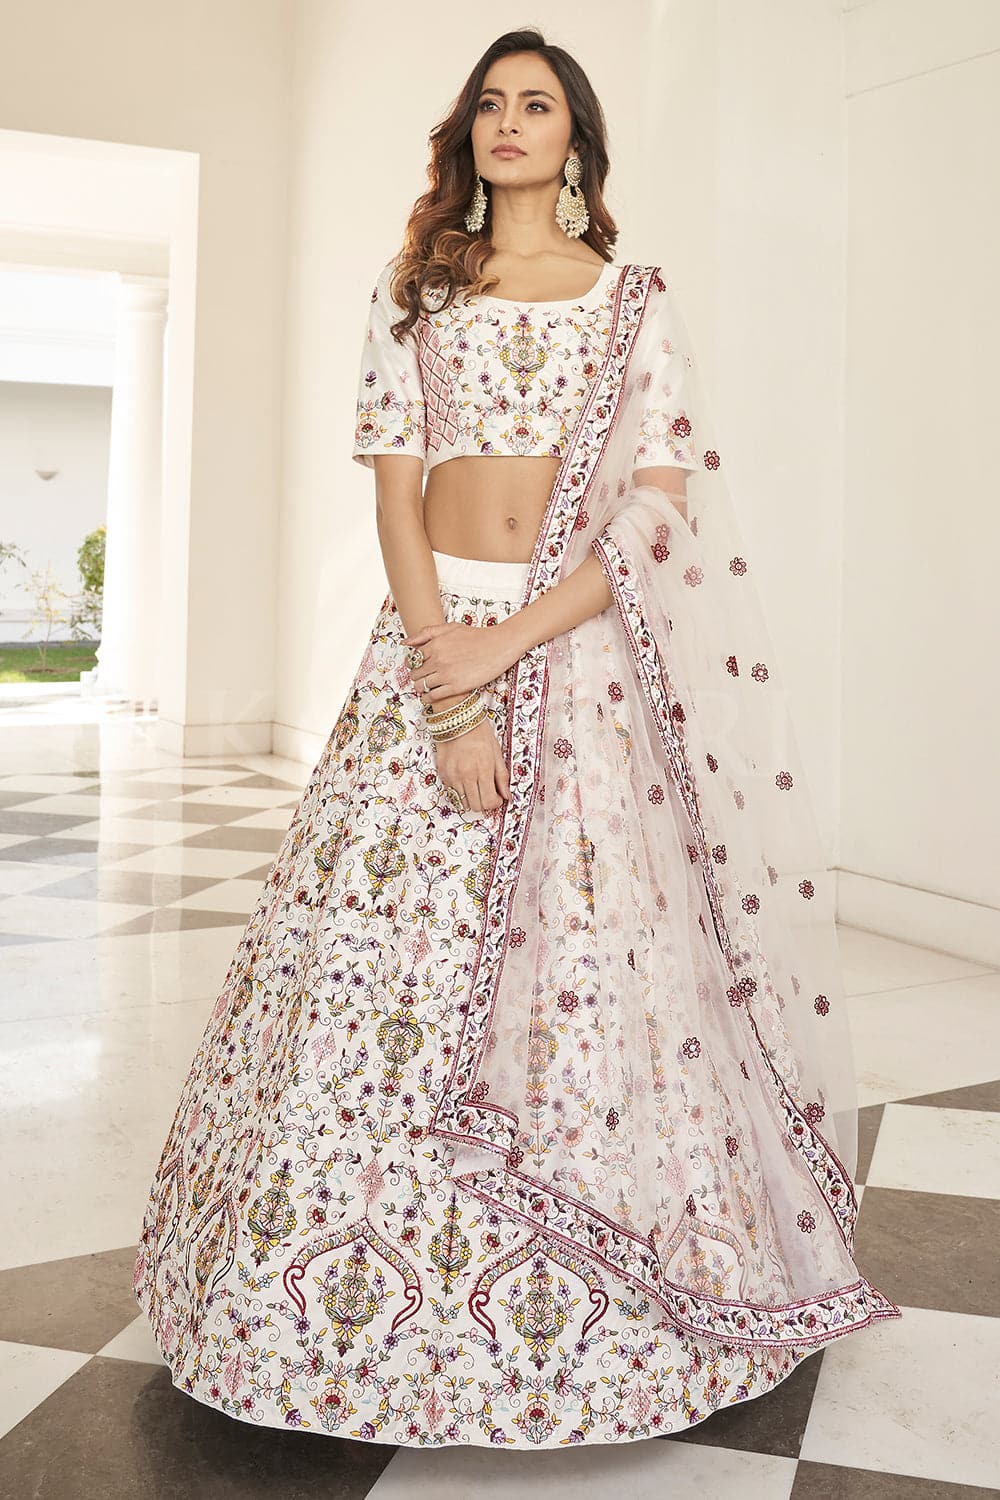 Want to Buy Lehenga Choli Online? Check These Hip Stores Now